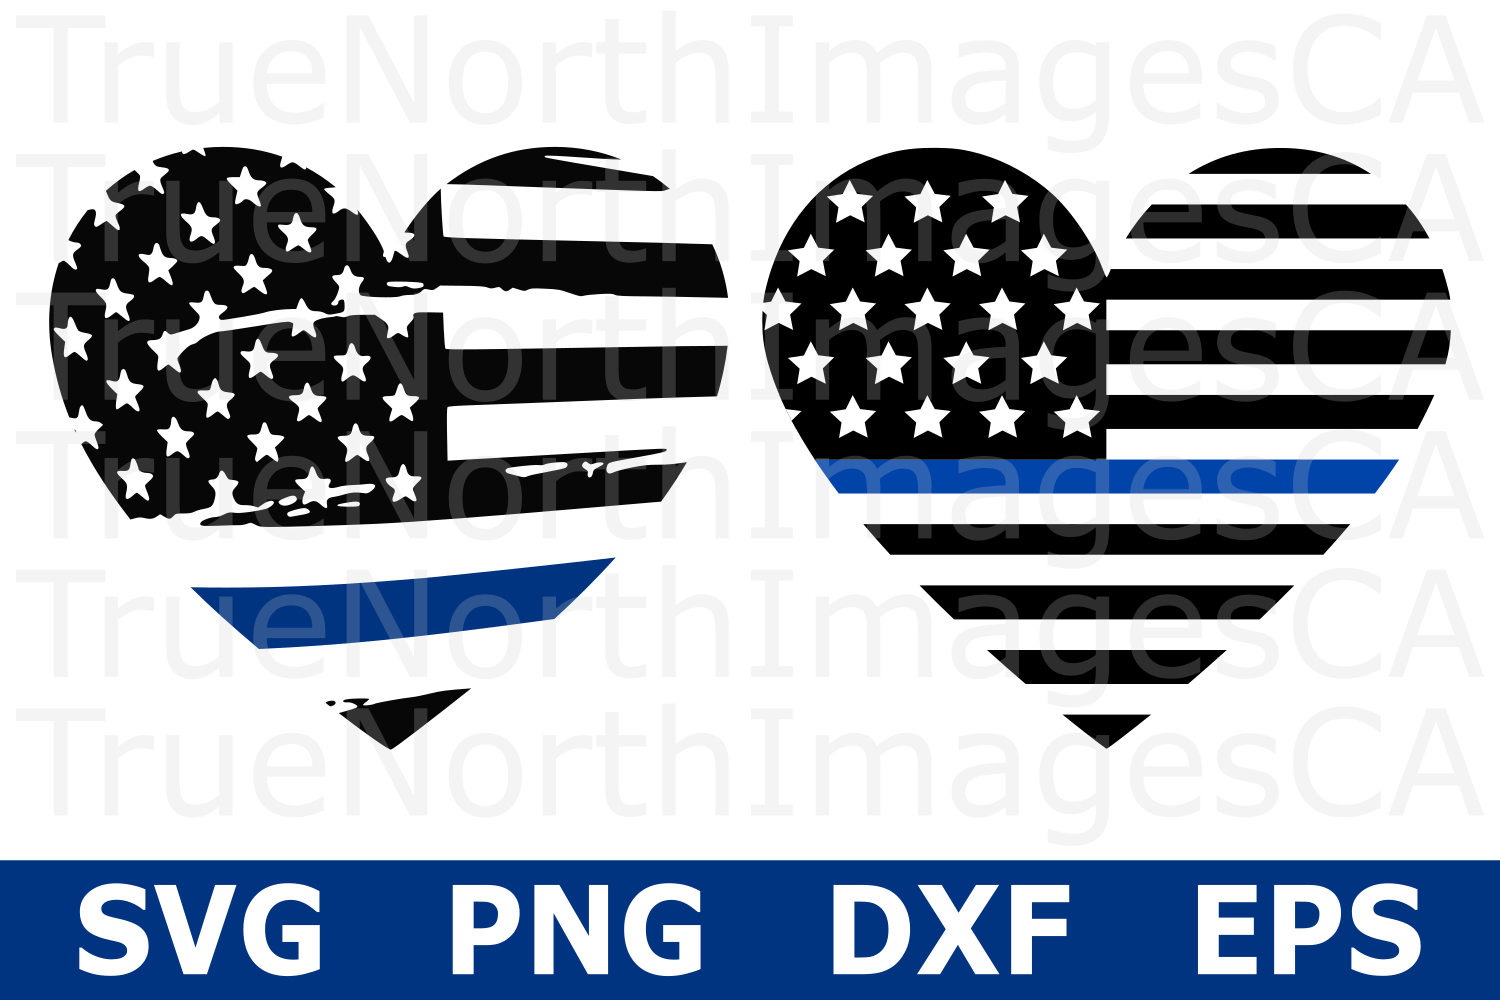 Download Thin Blue LIne Flag Heart - An Occupation SVG Cut File